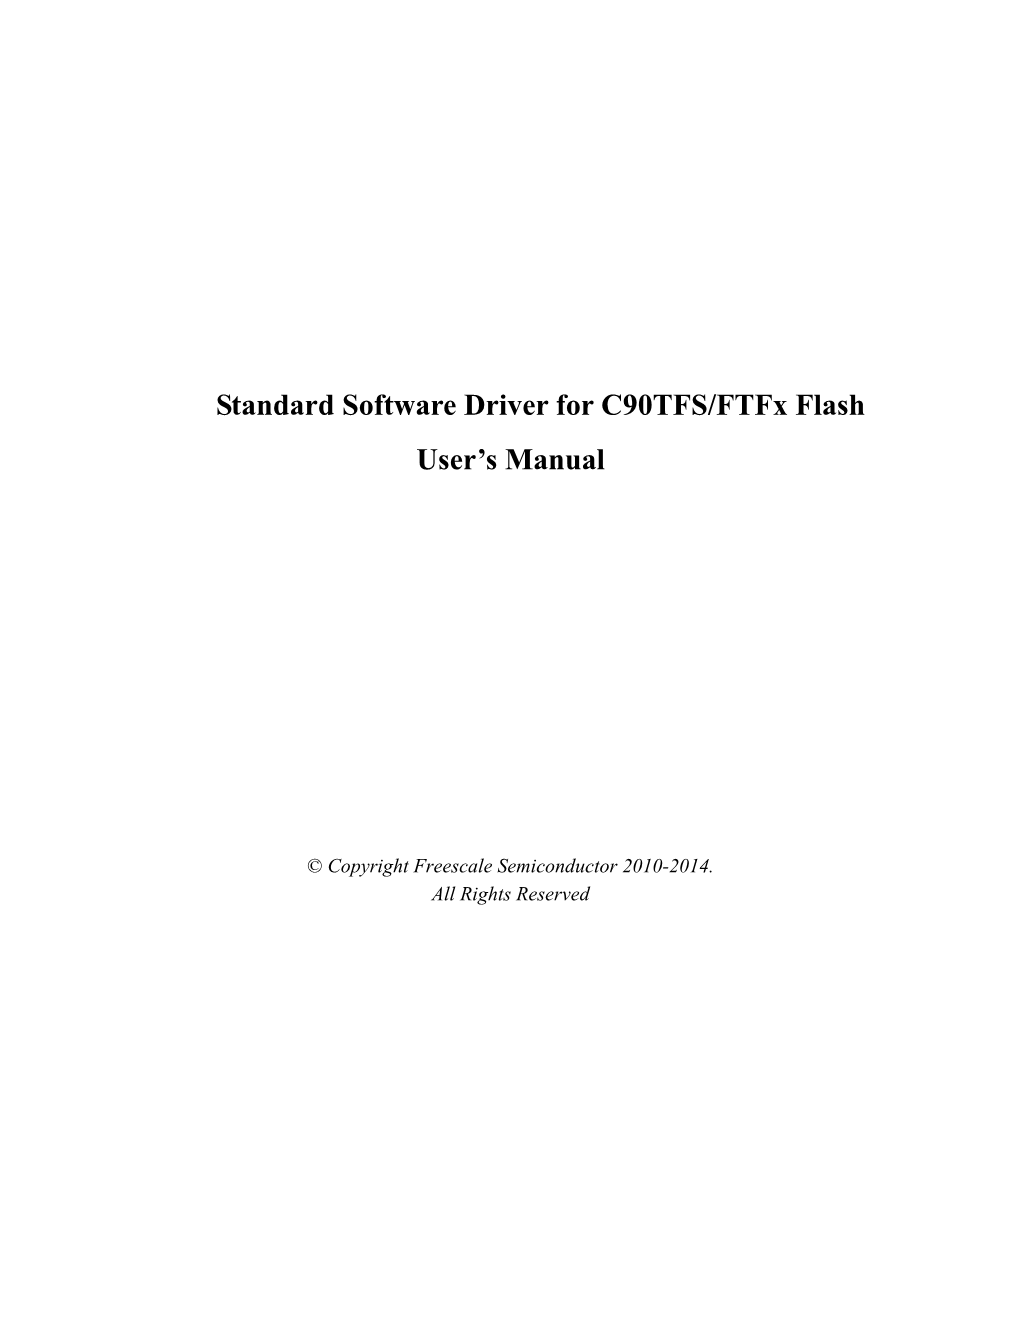 Standard Software Driver for C90TFS/Ftfx Flash User's Manual